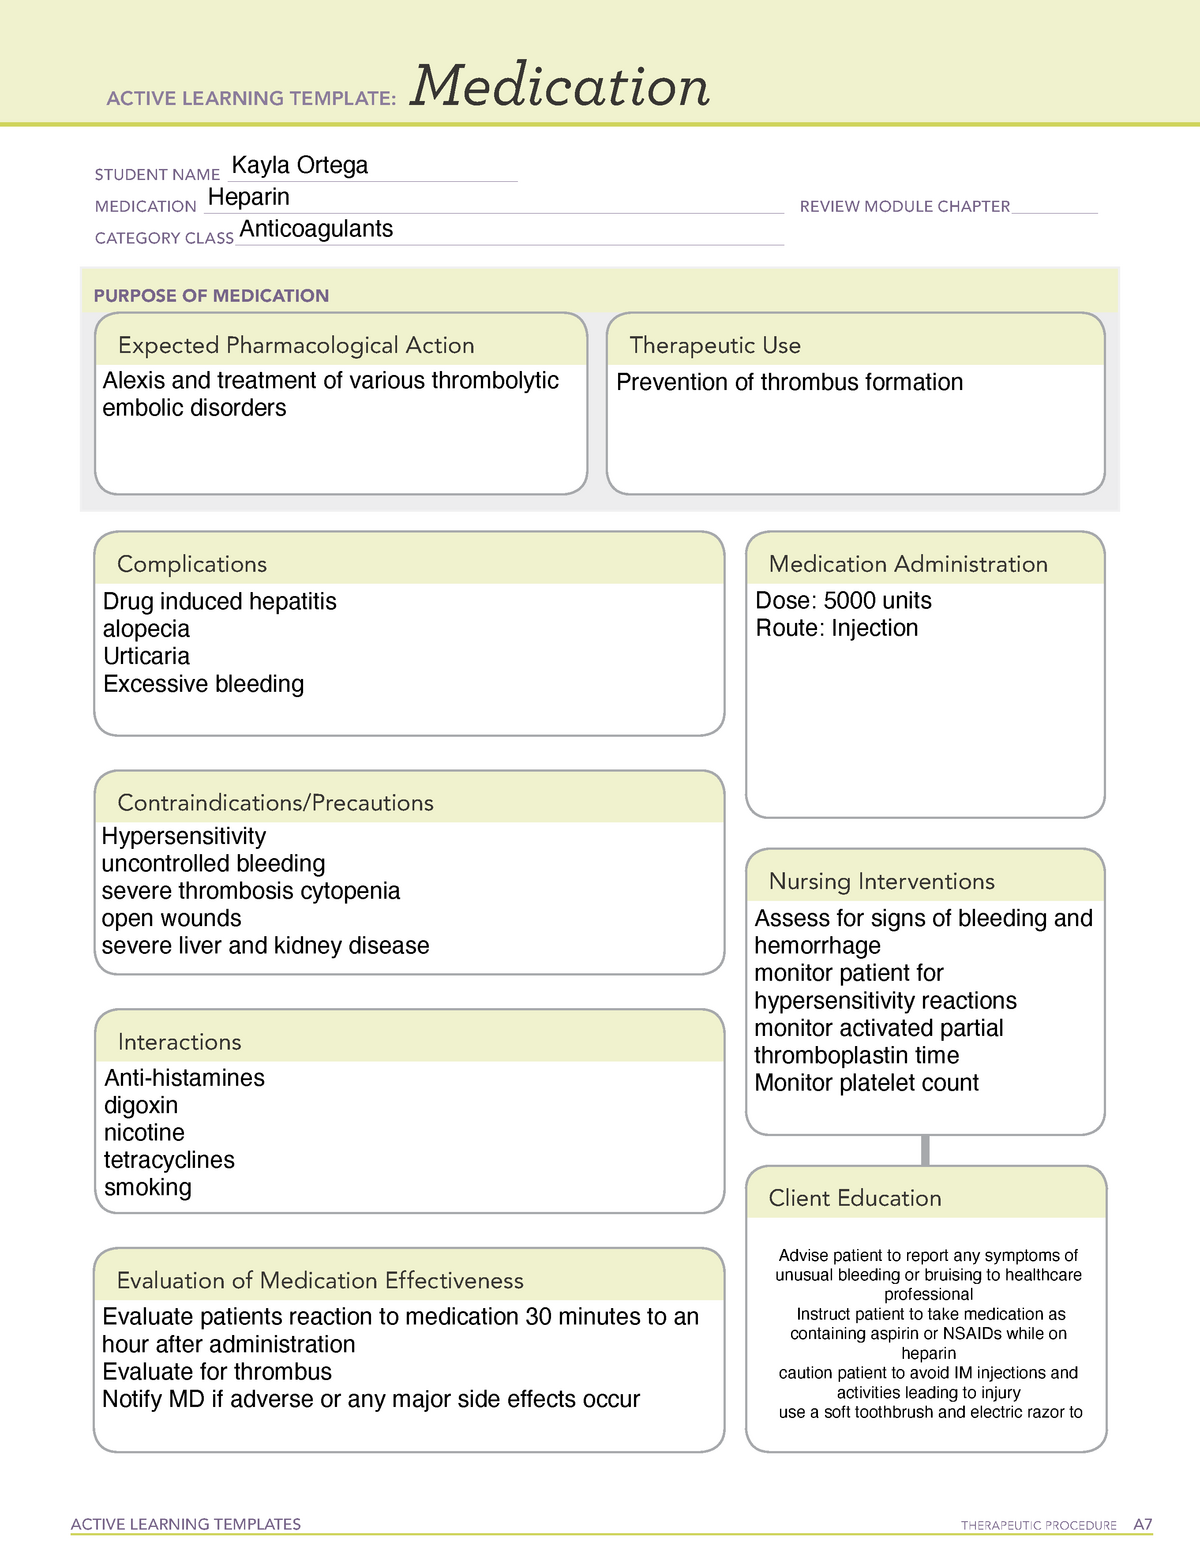 medication-concept-map-template